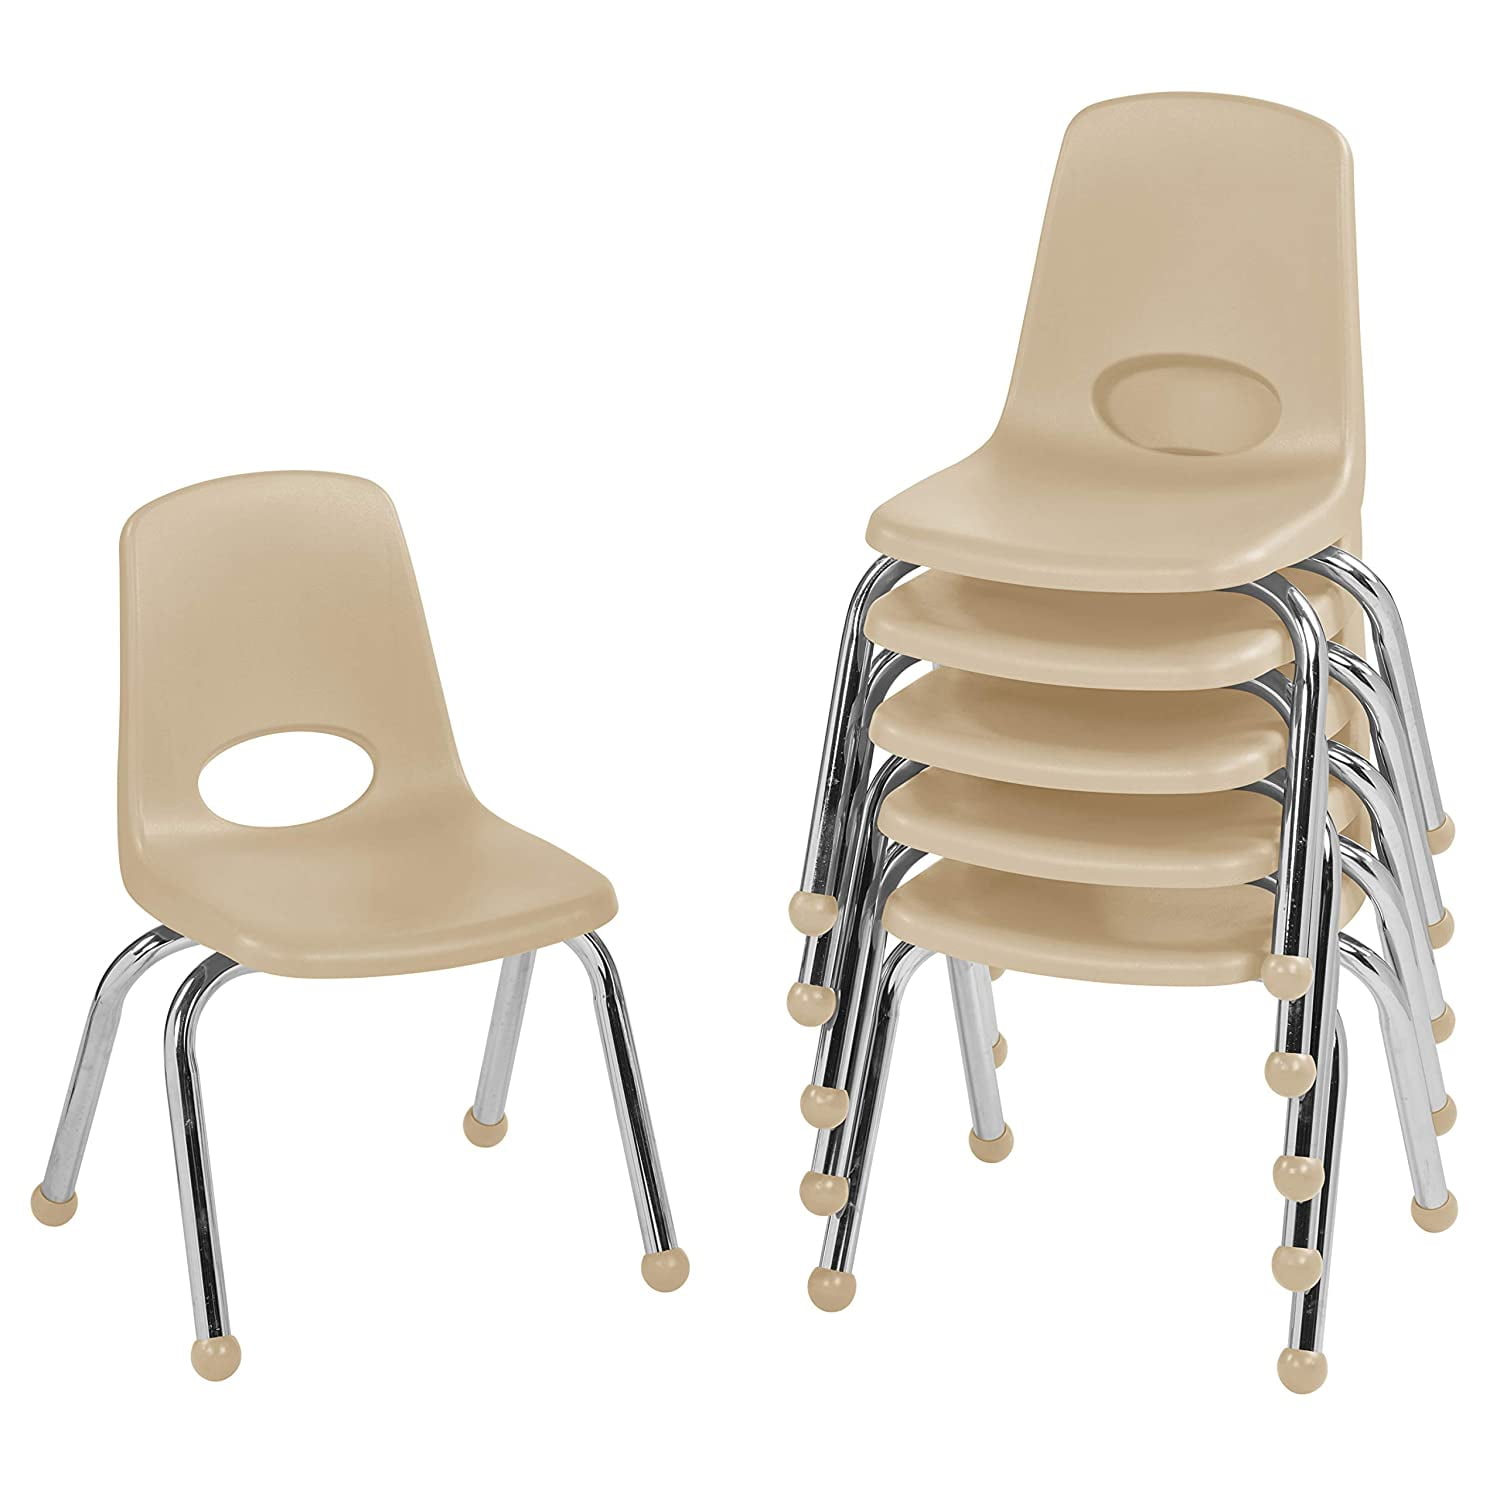 6-Pack 10 School Stack Chair Stacking Student Chairs with Chromed Steel Legs and Ball Glides Assorted Colors 